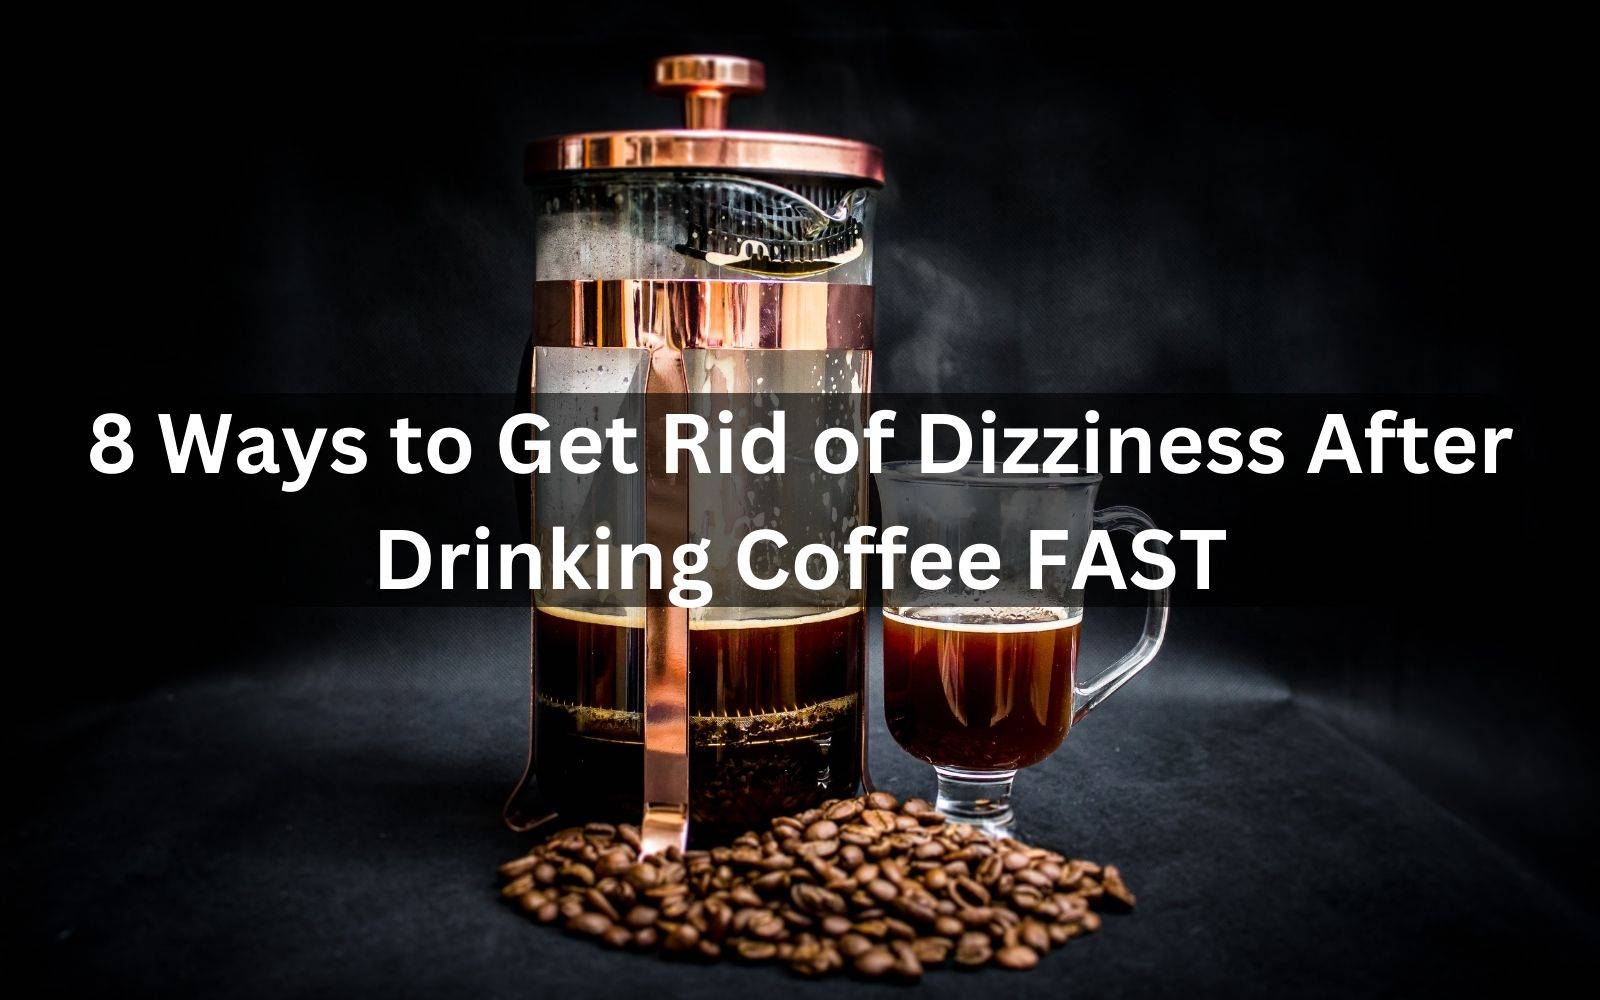 How to Get Rid of Dizziness After Drinking Coffee